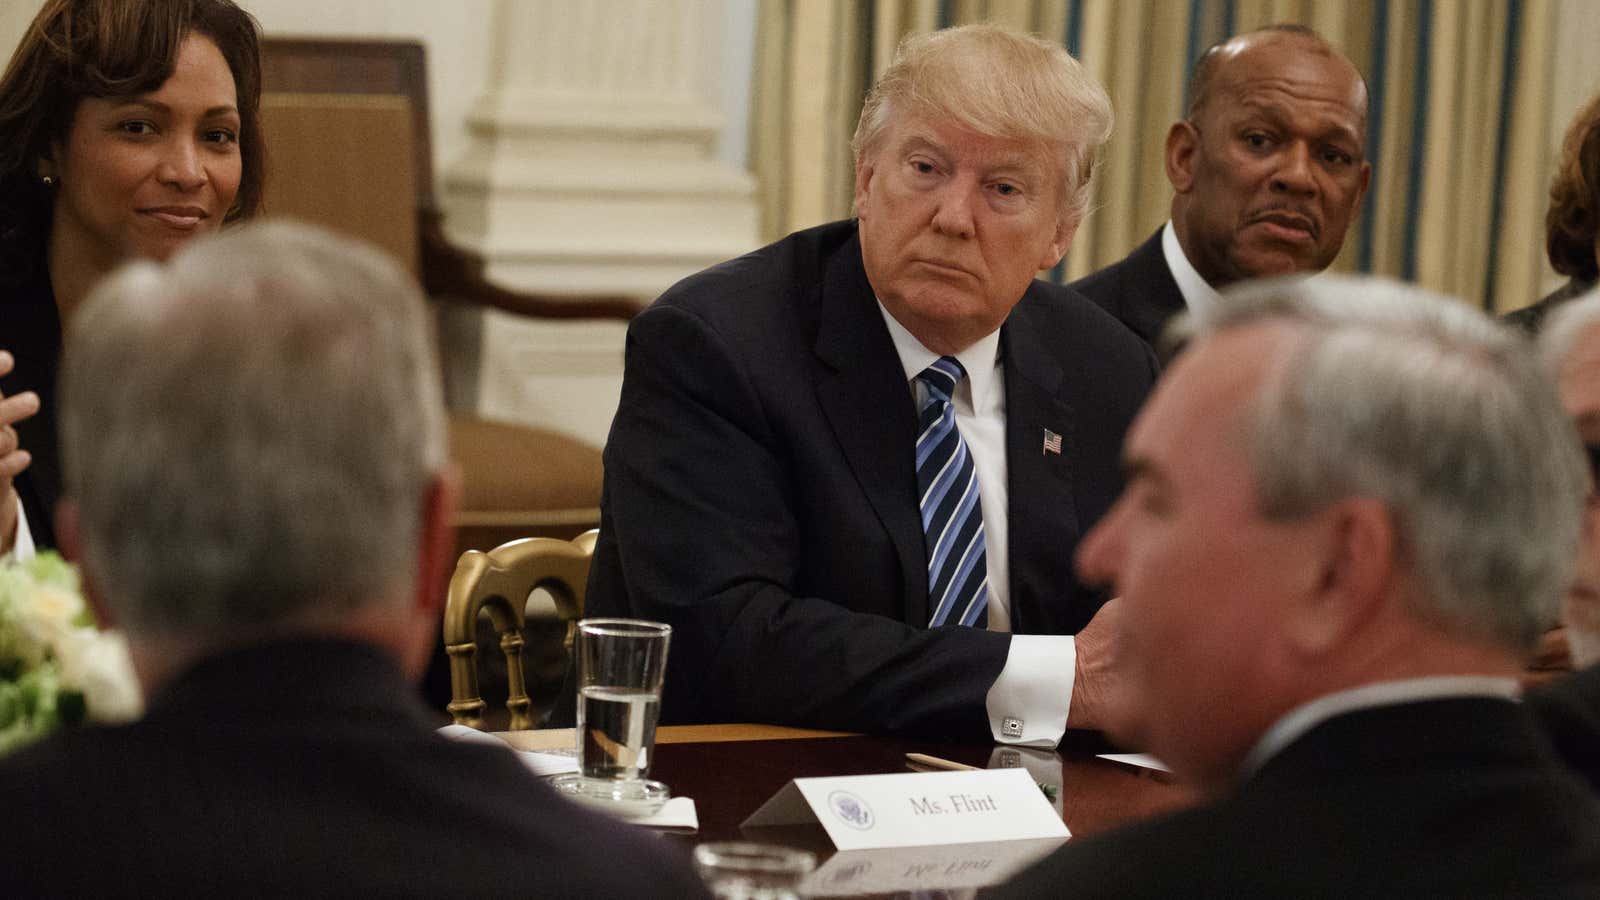 President Trump at a meeting with airline executives in the White House.